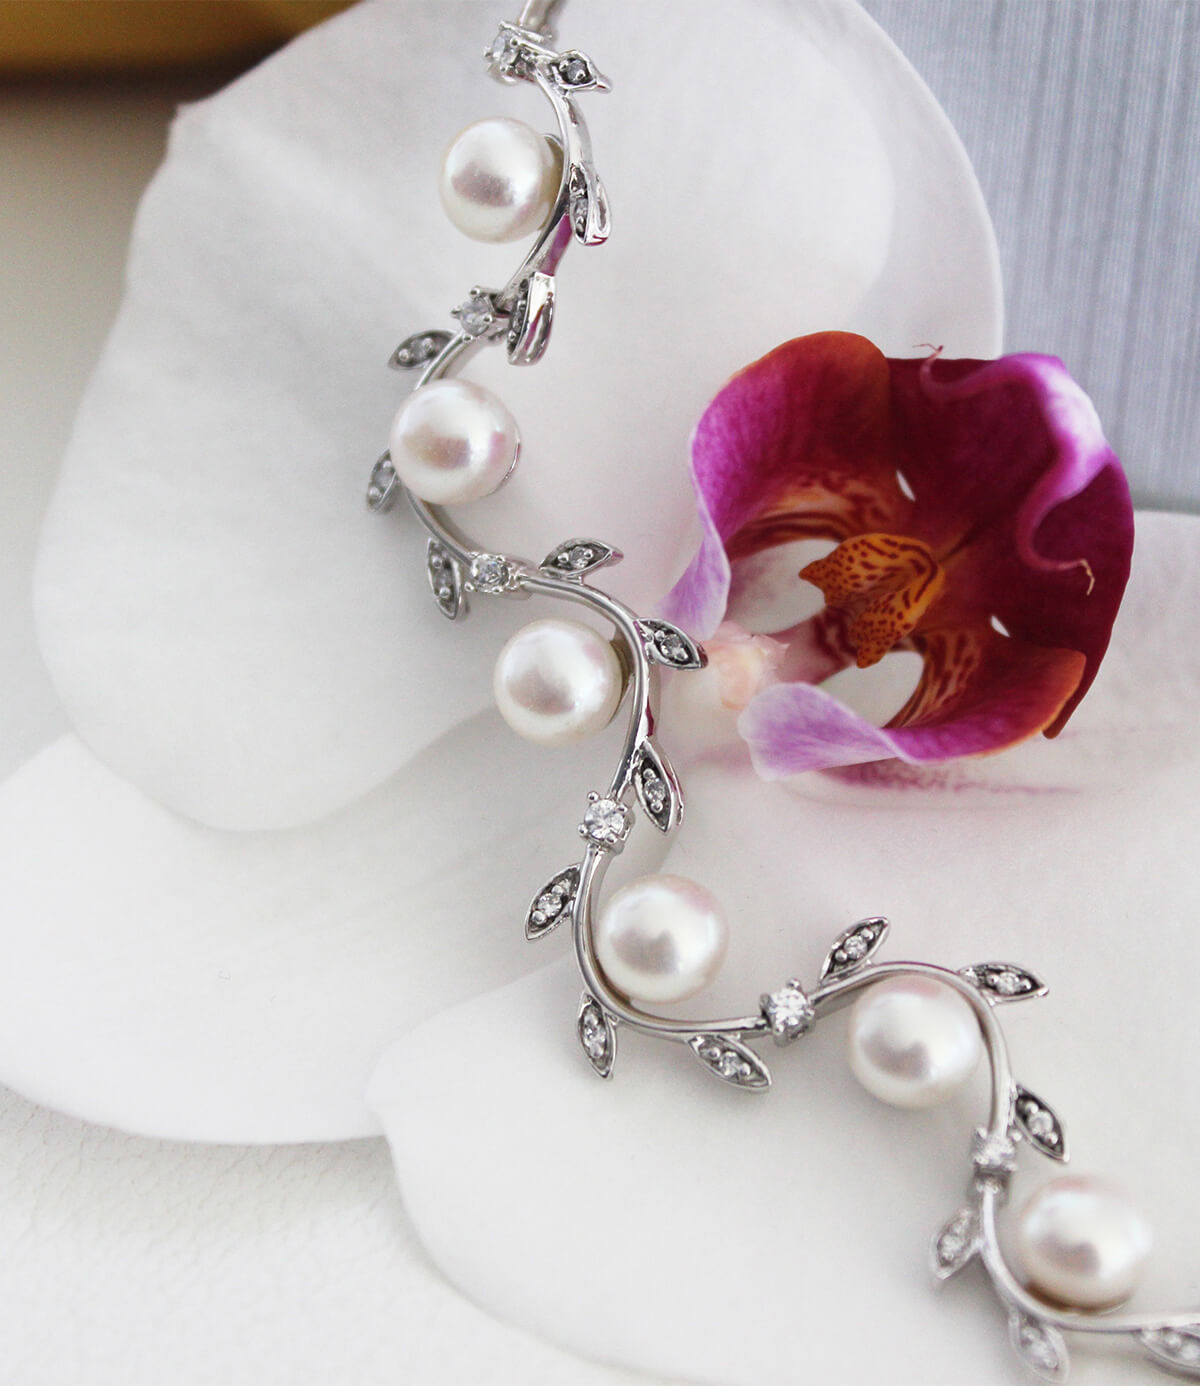 Tennis Bracelet Sterling Silver with Pearls Chic Flora